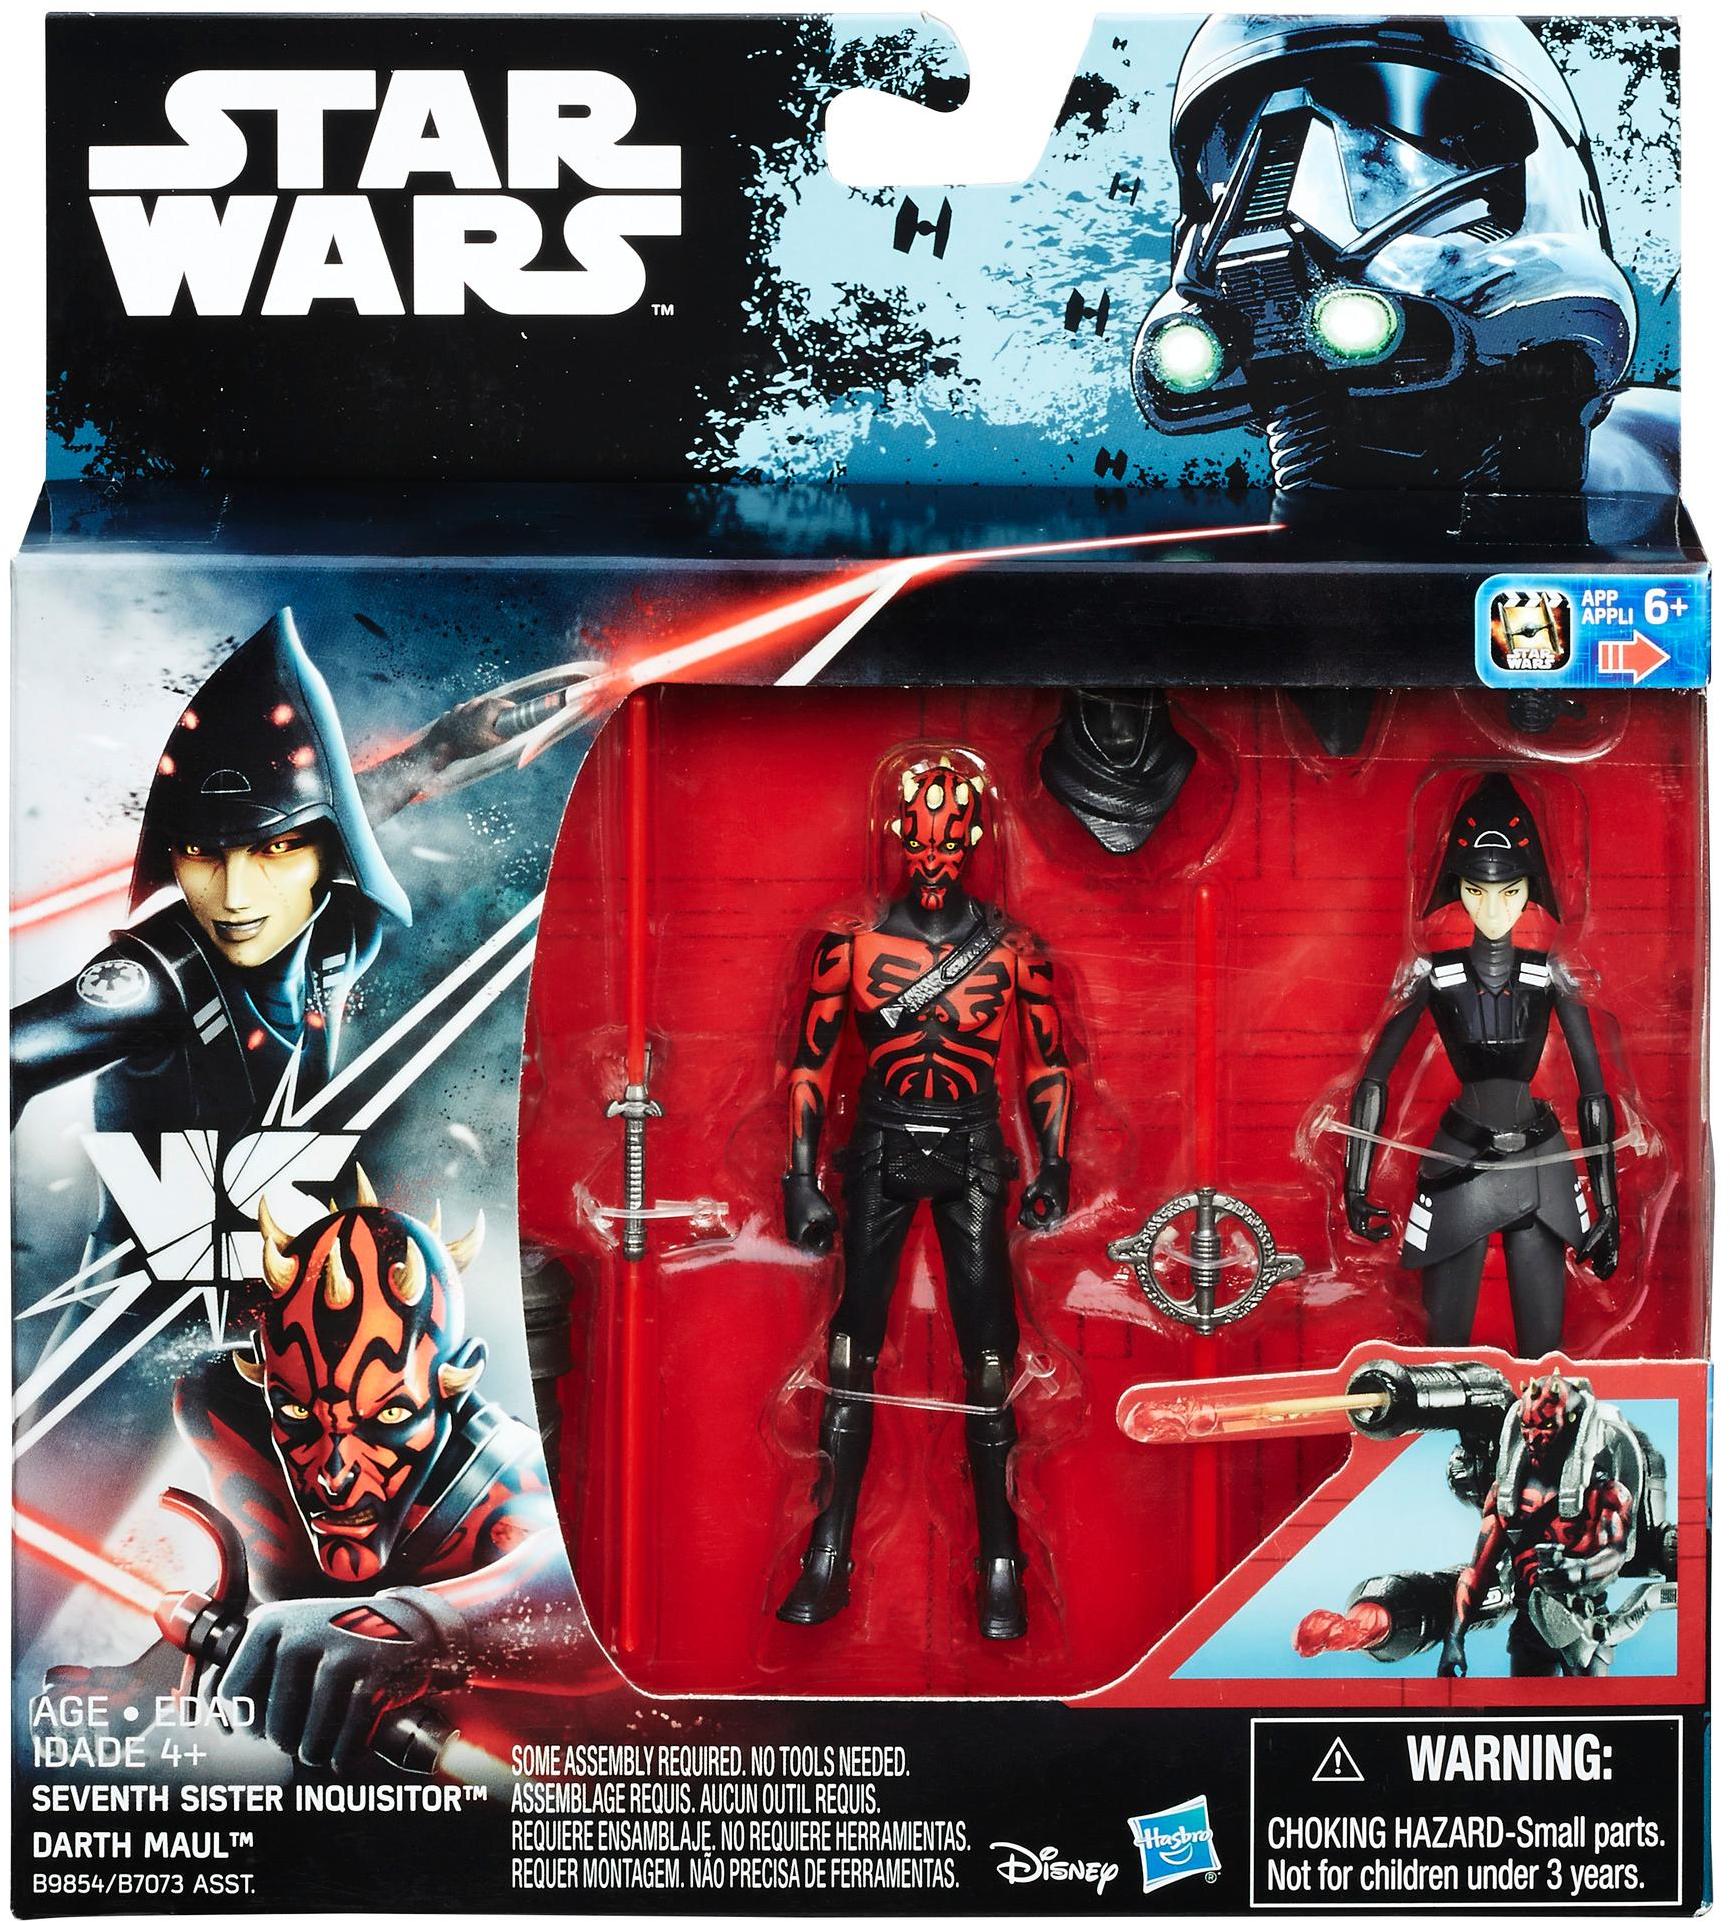 Disney Star Wars Rogue One 'Seventh Sister Inquisitor & Darth Maul' Action Figure Toy